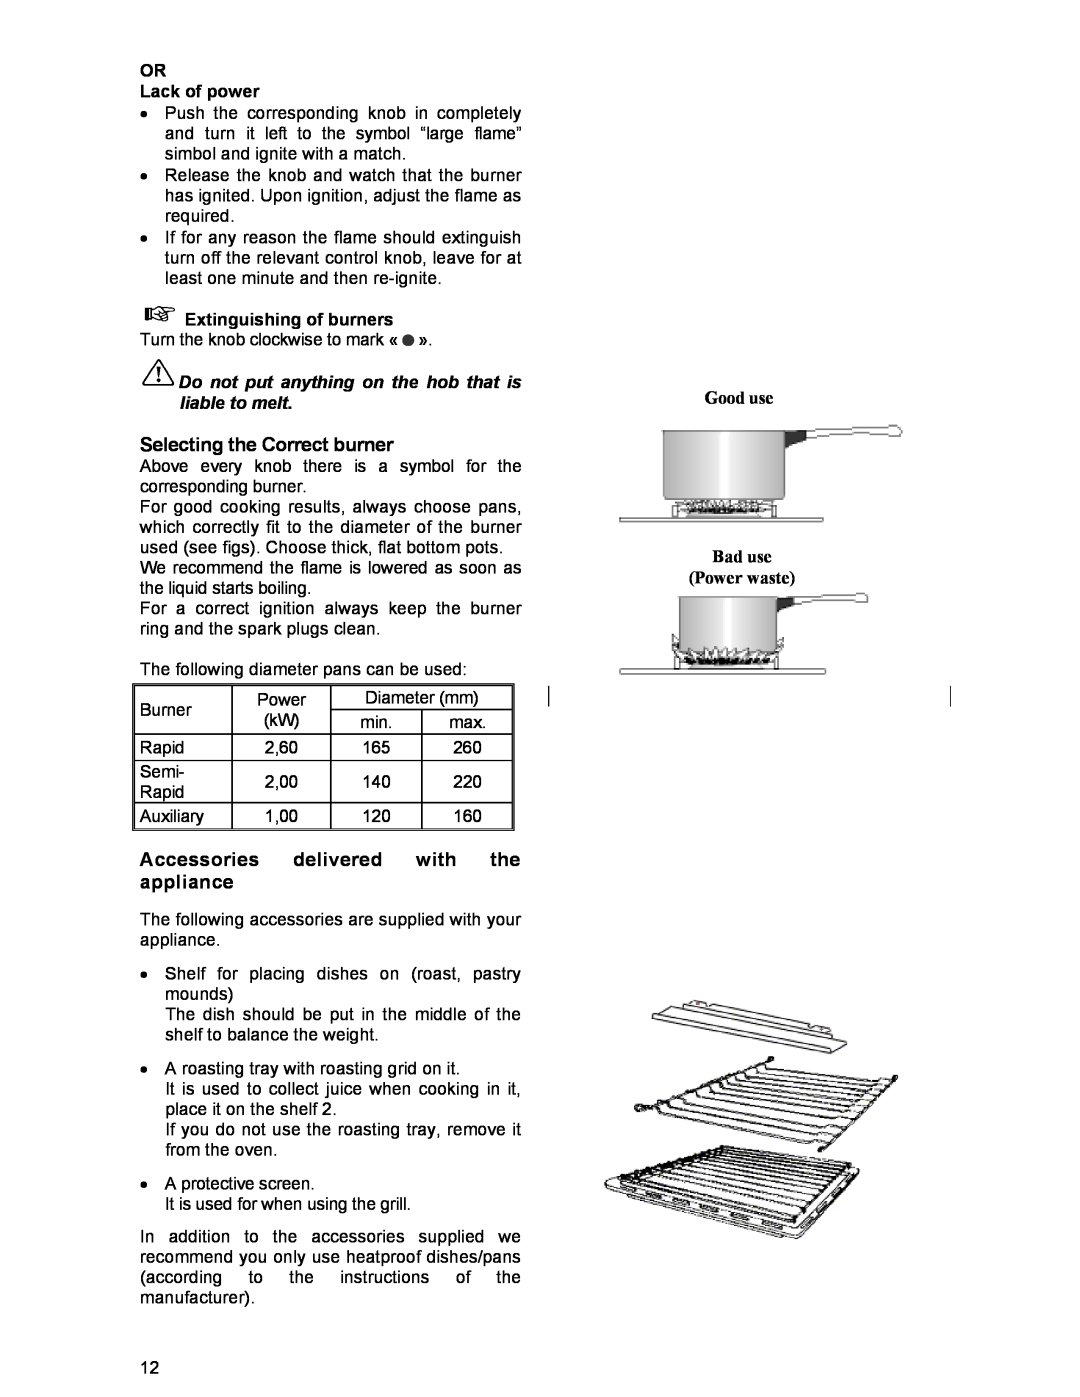 Moffat GSC 5061 manual Selecting the Correct burner, Accessories delivered with the appliance, OR Lack of power 